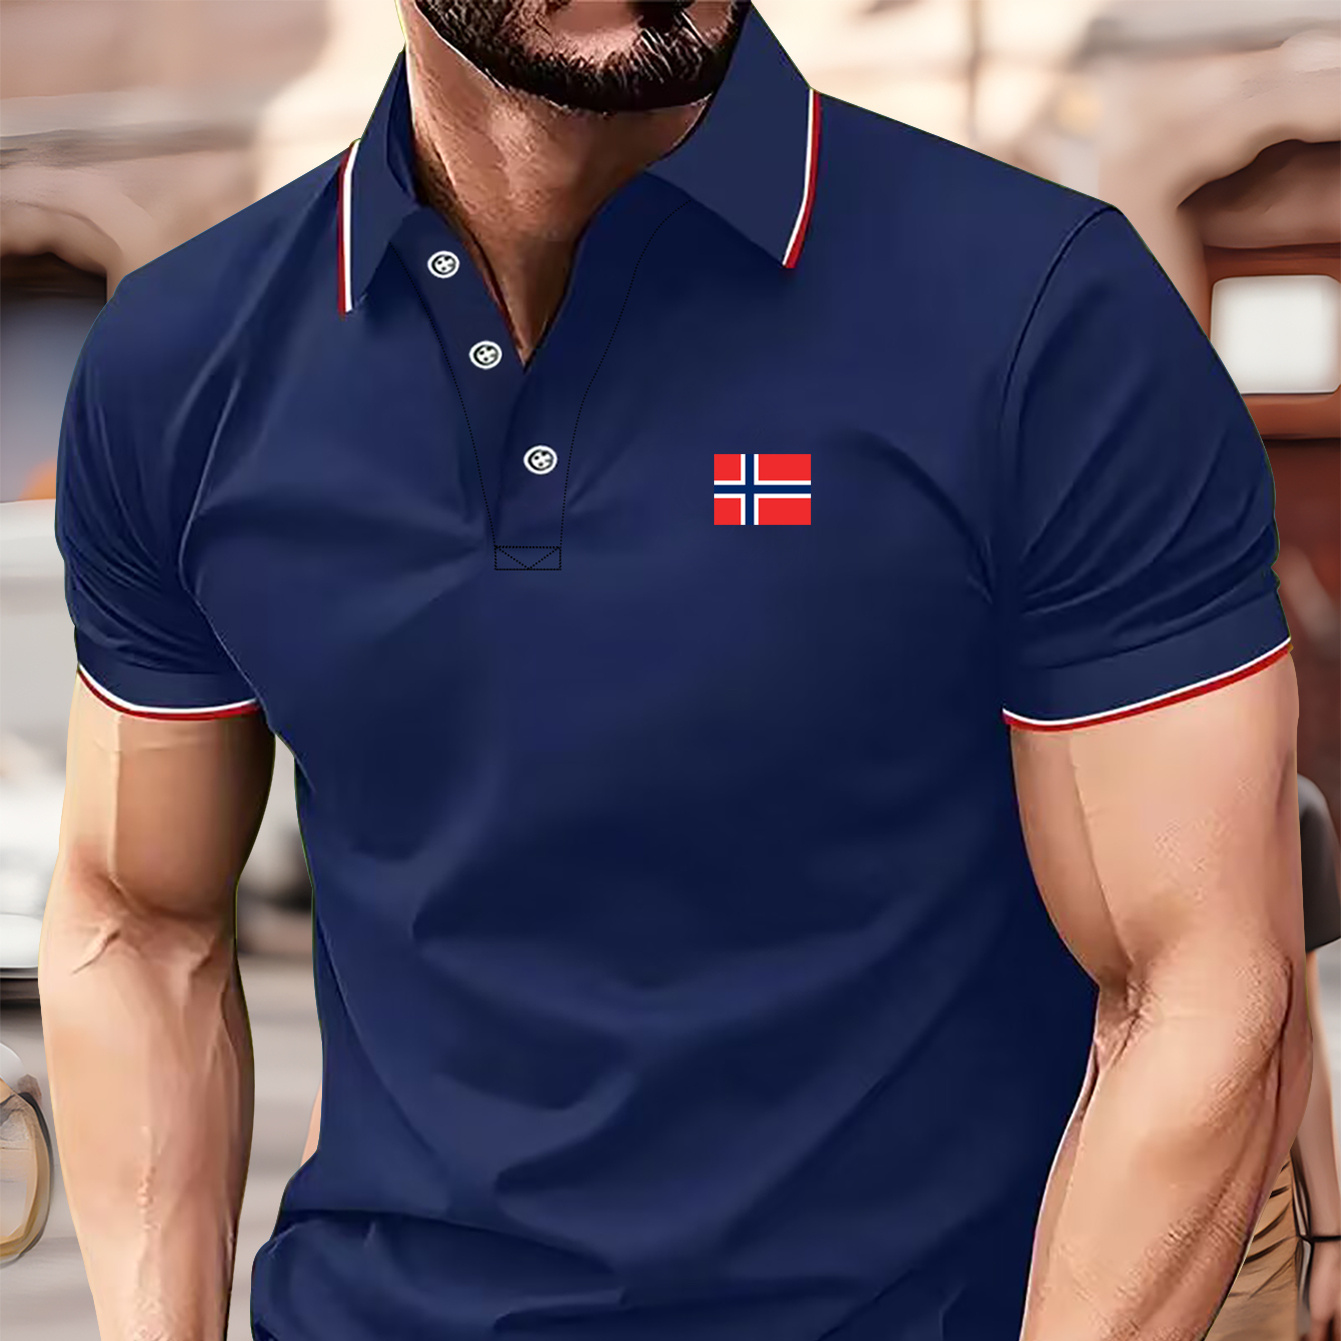 

Flag Of Norway Print Men's Short Sleeve Lapel Golf T-shirt, Summer Trendy Tennis Tees, Casual Comfy Breathable Top For Outdoor Sports